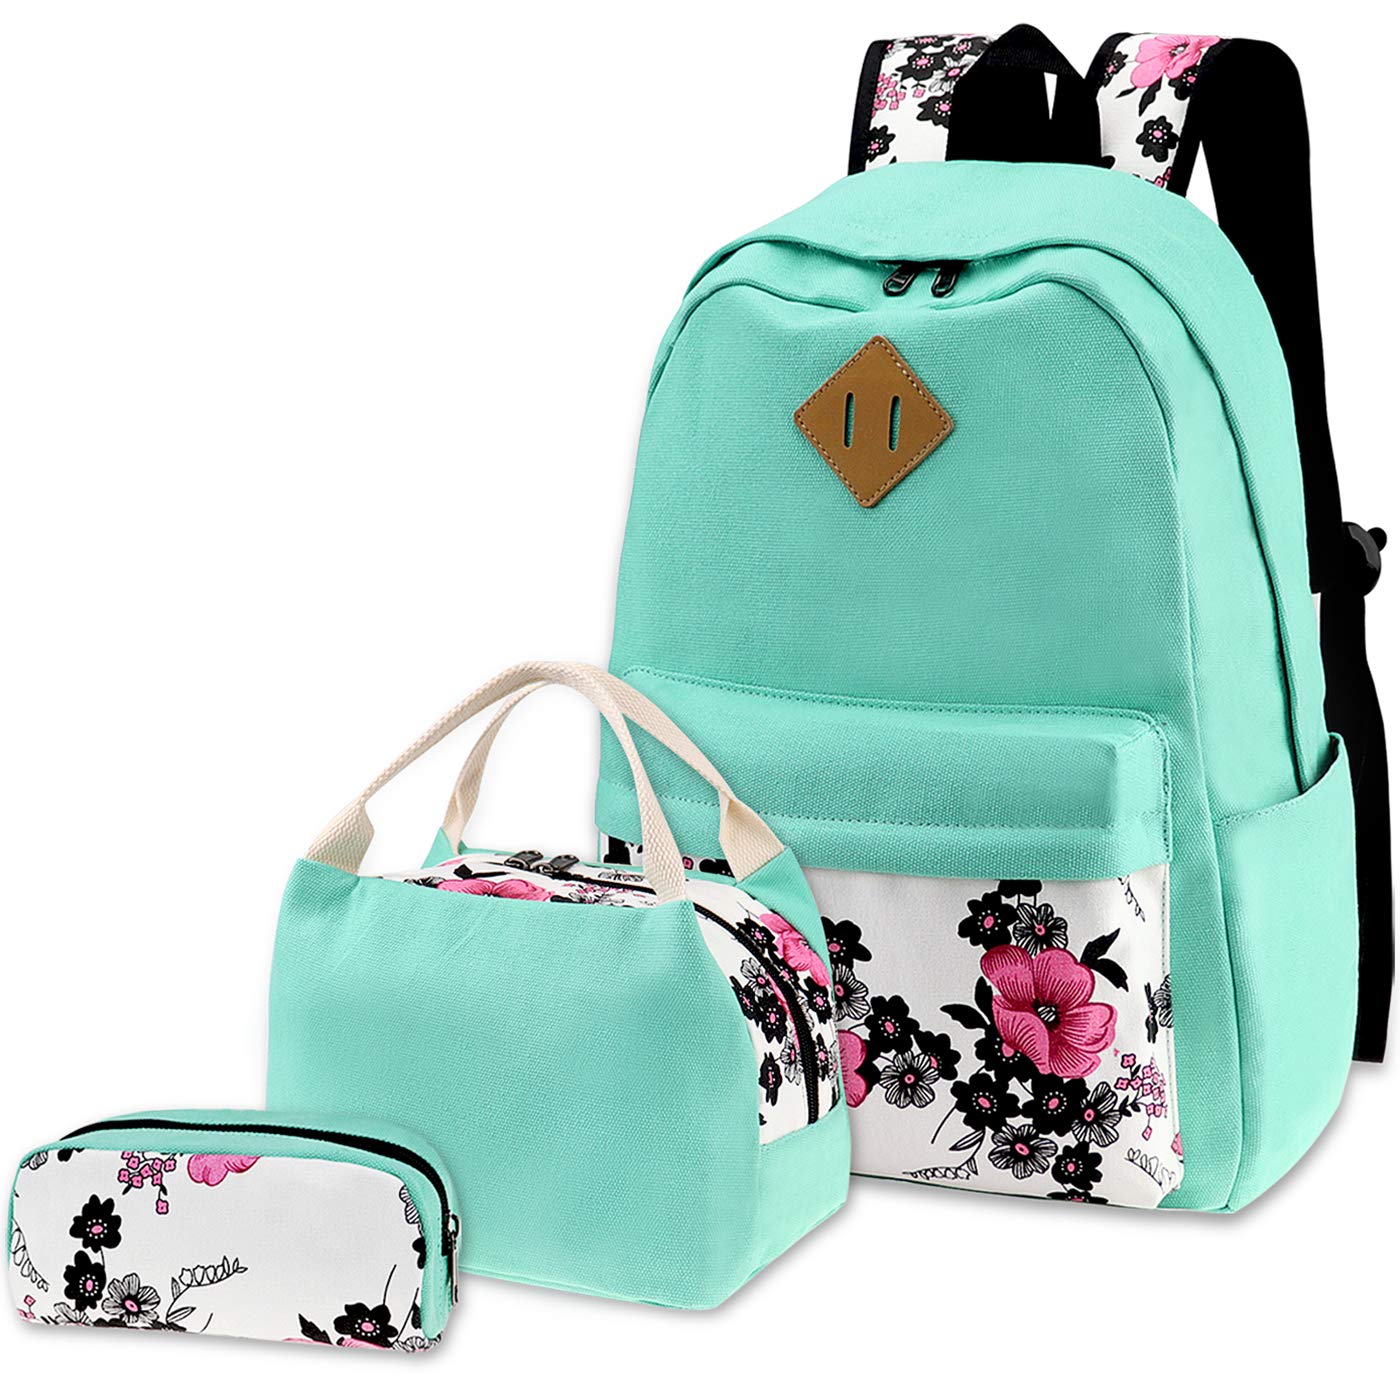 Floral School Bags Set for up 13 Years Old Girls, Student Backpack with Lunch Box + Pencil Case